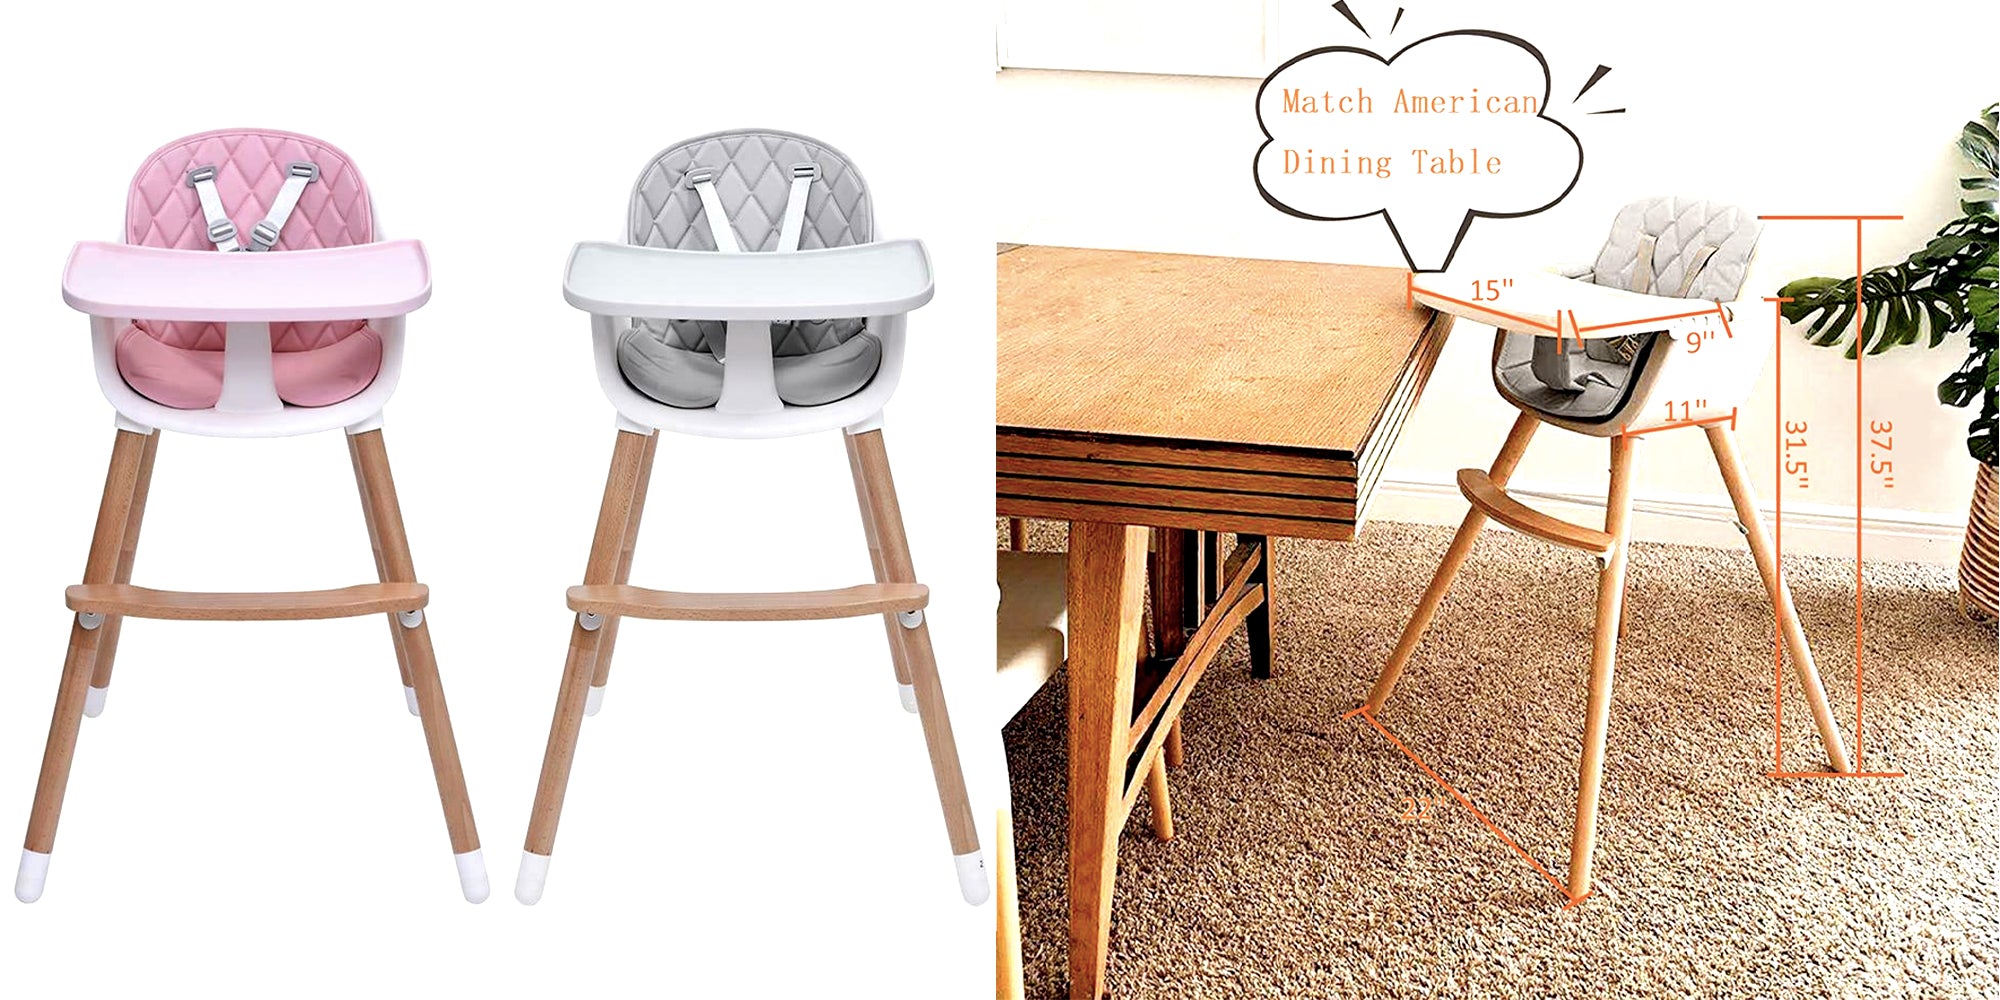 High Chair | Baby Hight Chair with for Baby/Infants/Toddlers 3-in-1 Wooden High Chair Grey Pink Wooden